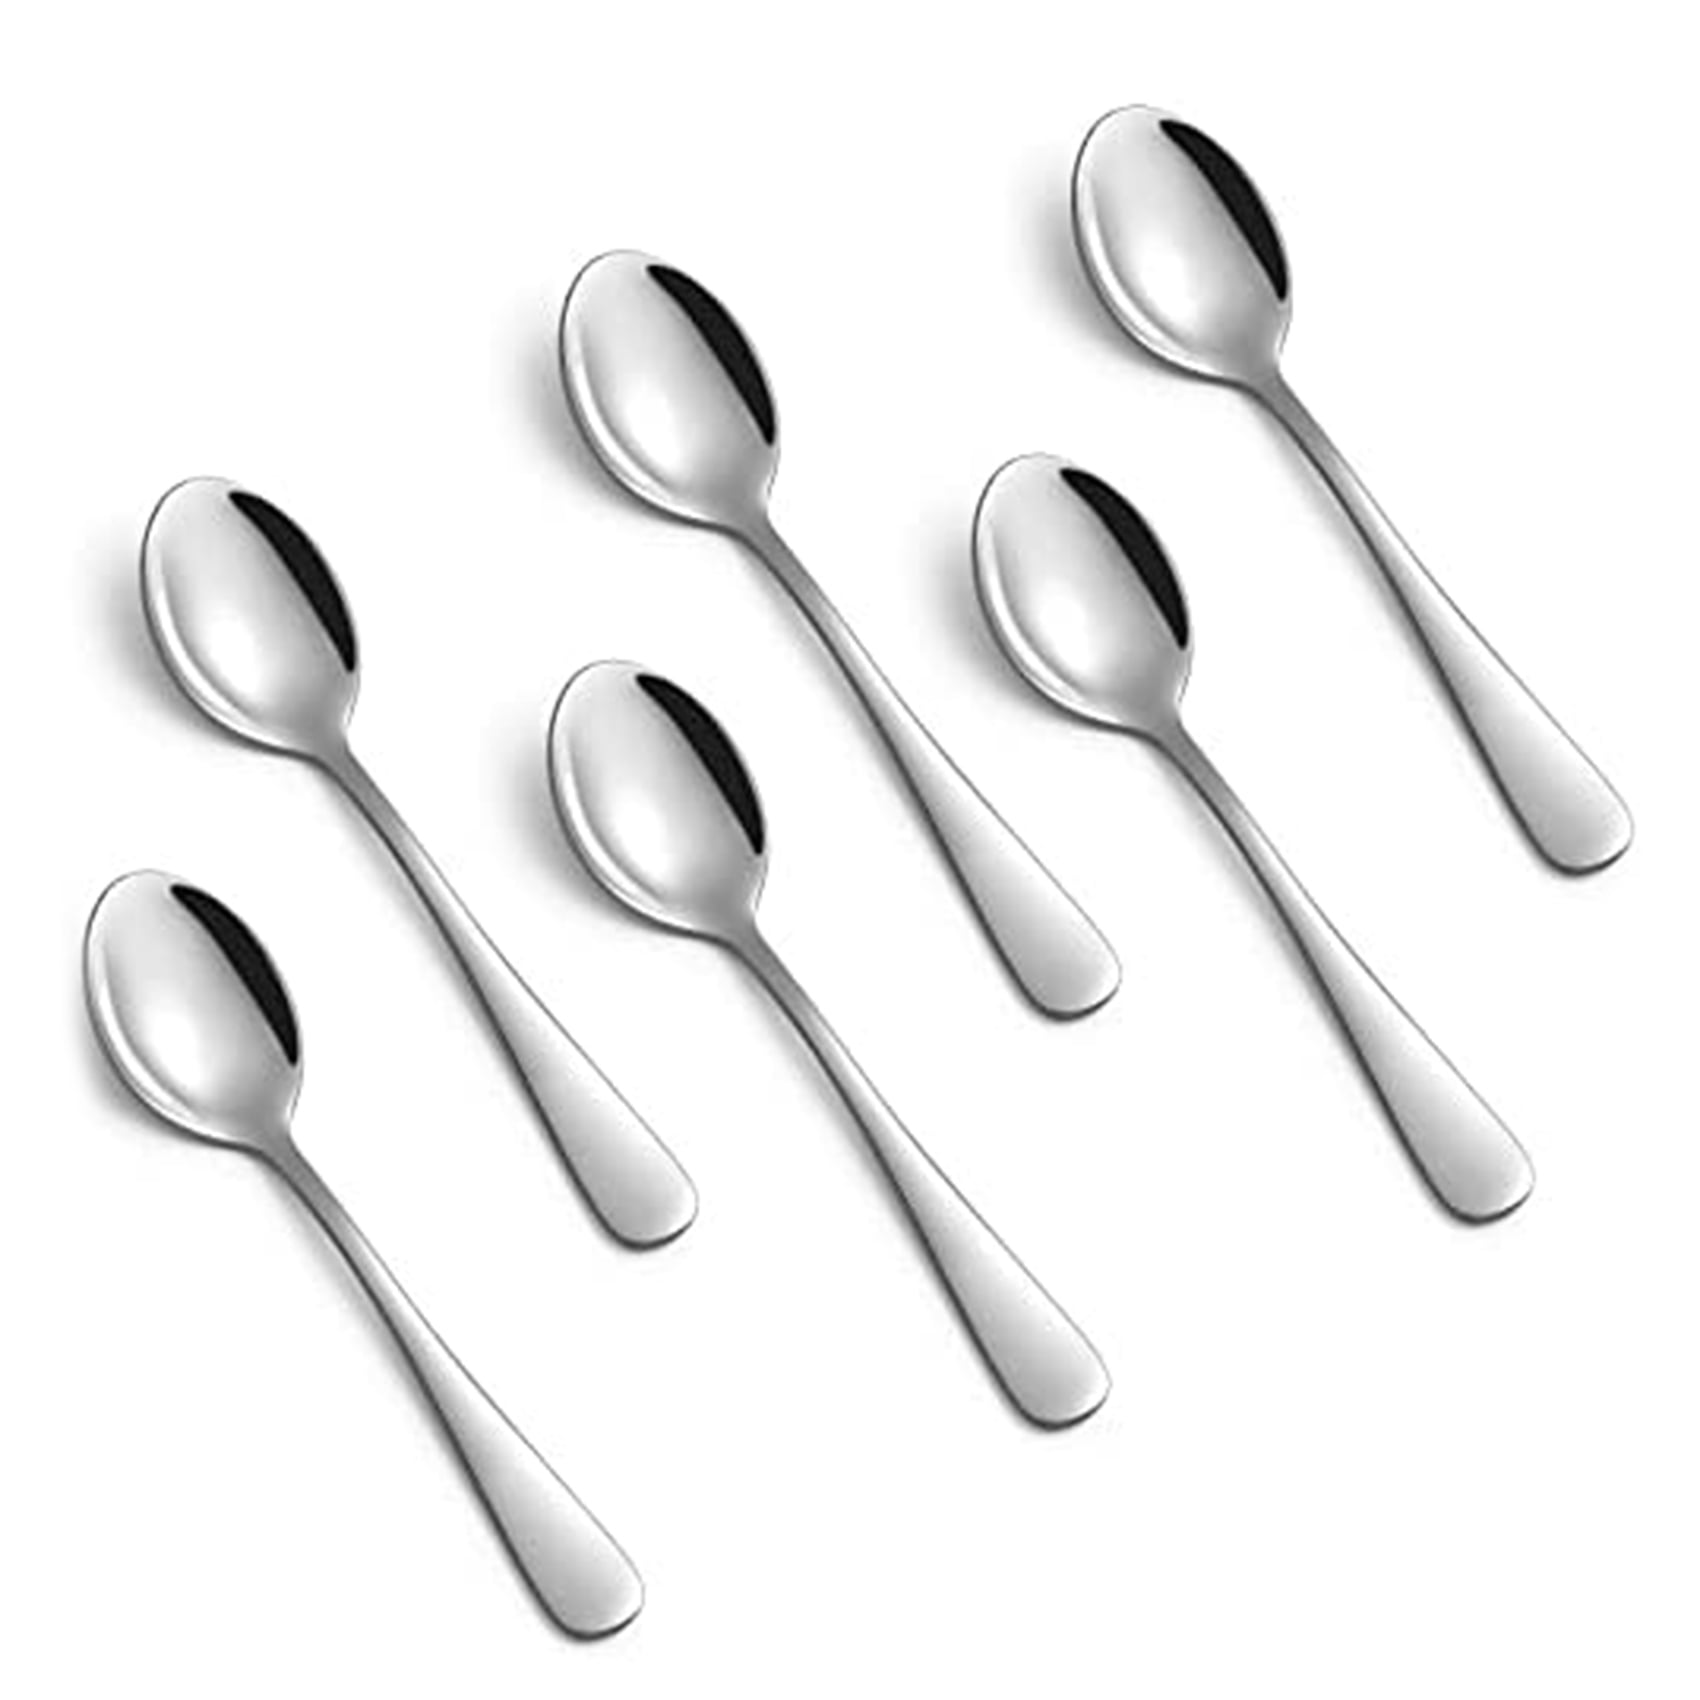 F Set of 12 5-Inch Anbers Stainless Steel Demitasse Espresso Spoons 